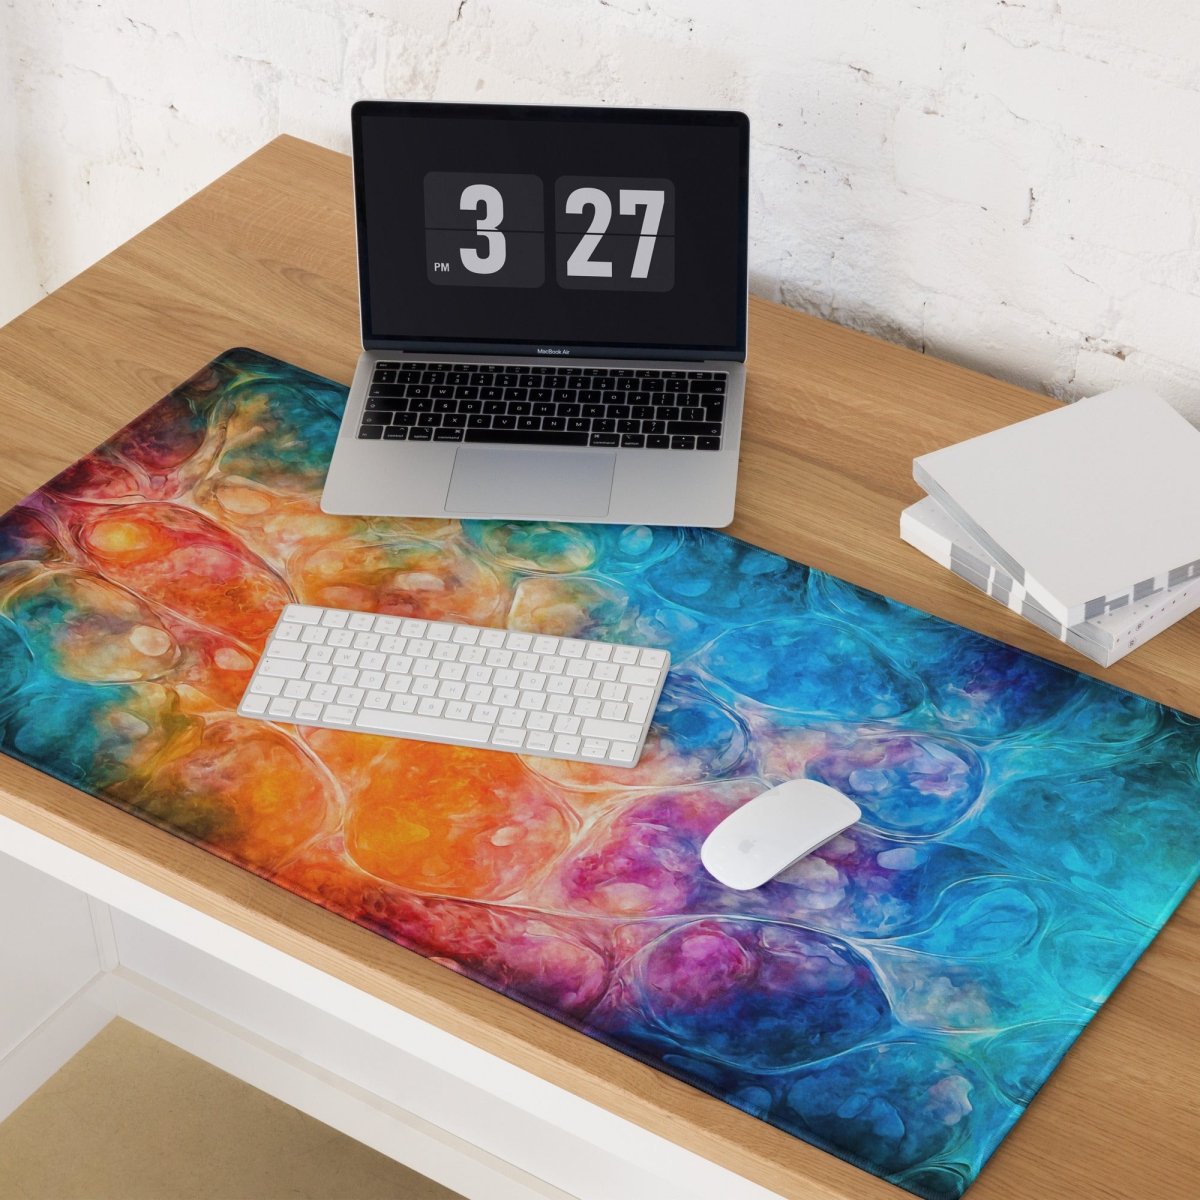 Boiling lava flow - Gaming mouse pad - Ever colorful